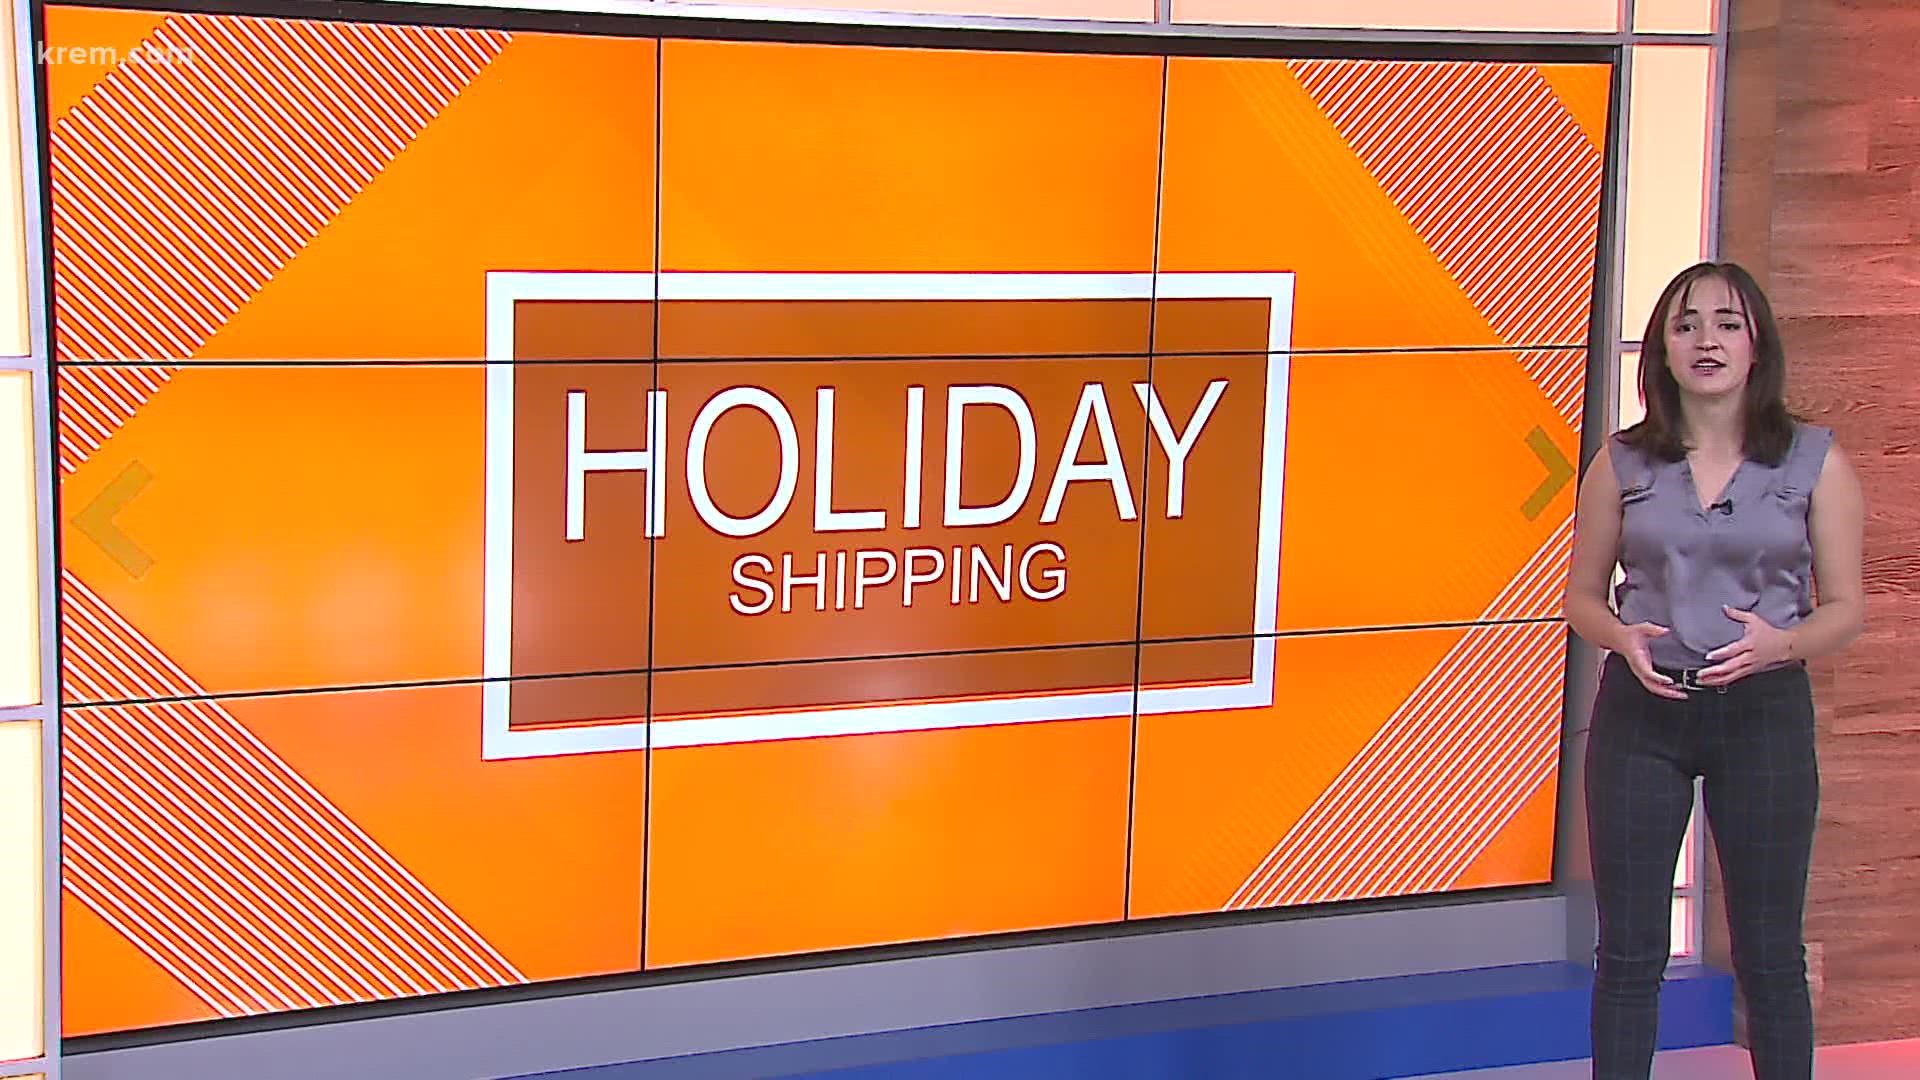 Plus time is running out to get your gifts shipped for the holiday. Here are the deadlines for sending your packages with USPS, UPS, FedEX before Christmas.